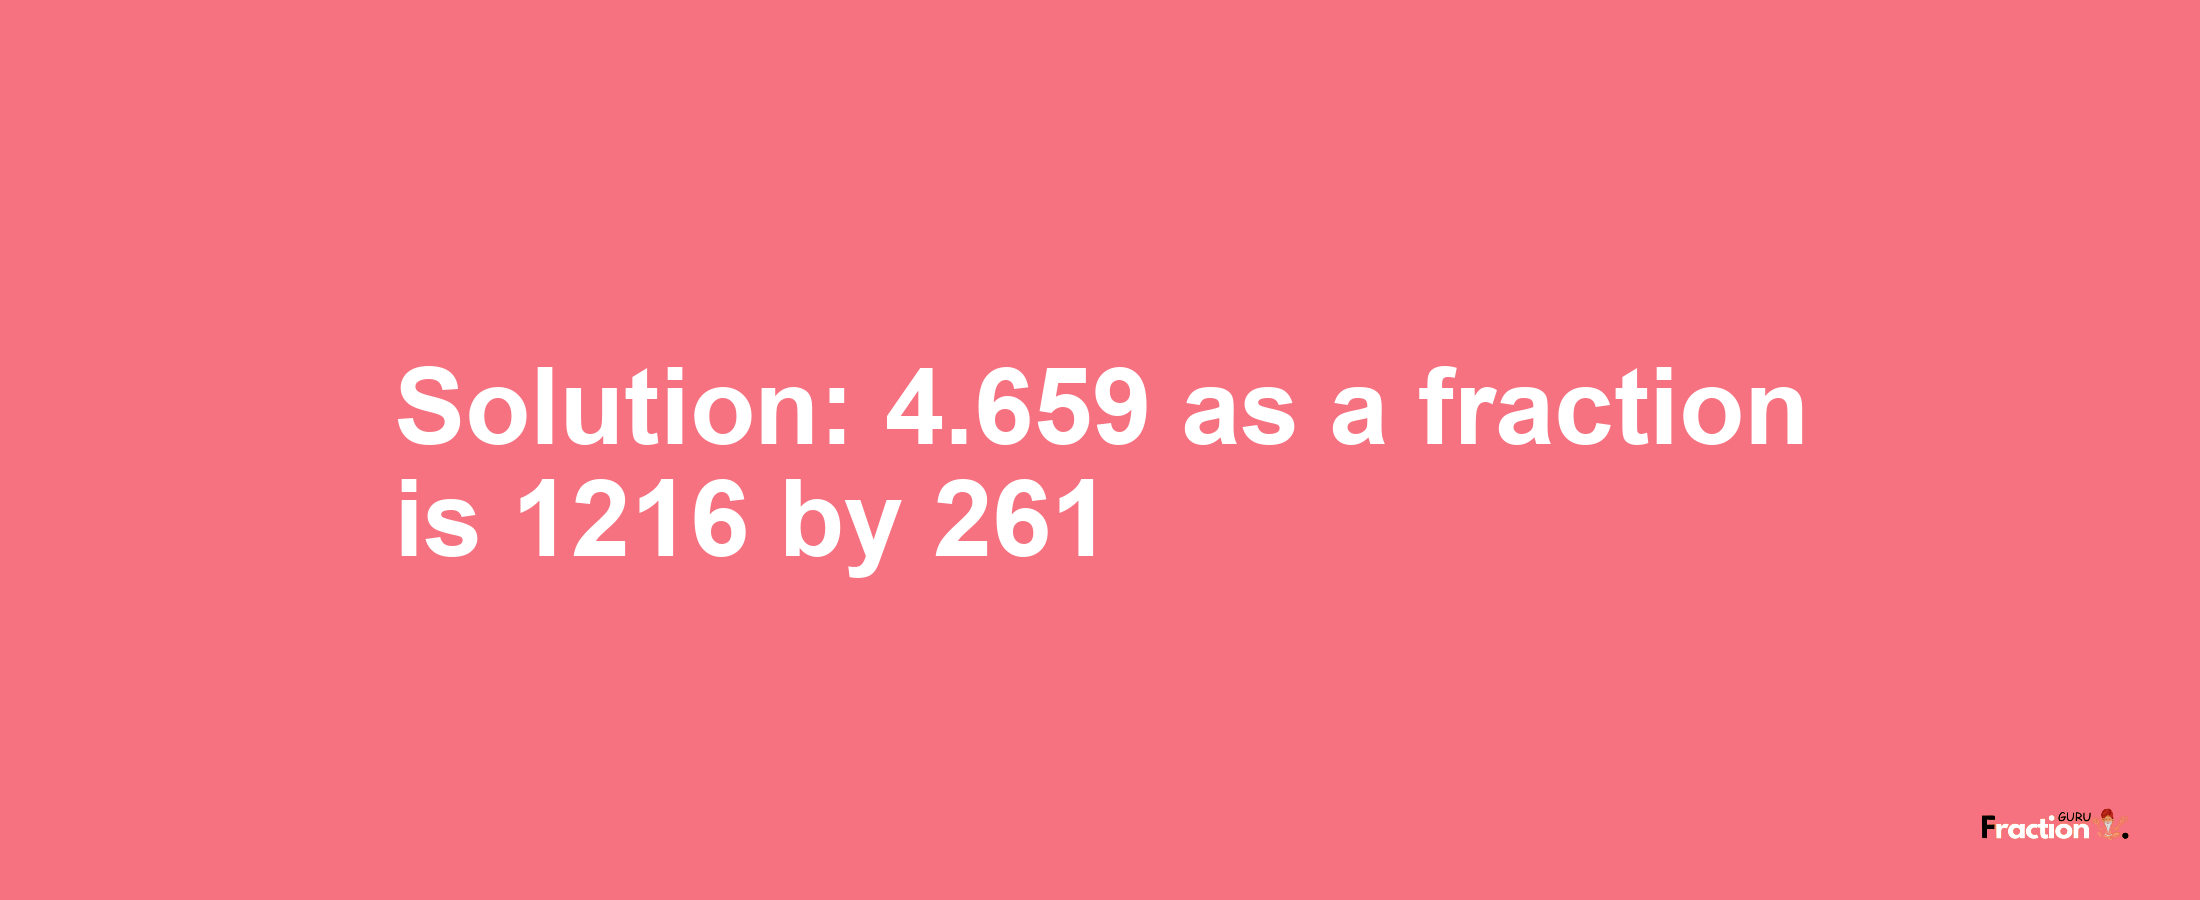 Solution:4.659 as a fraction is 1216/261